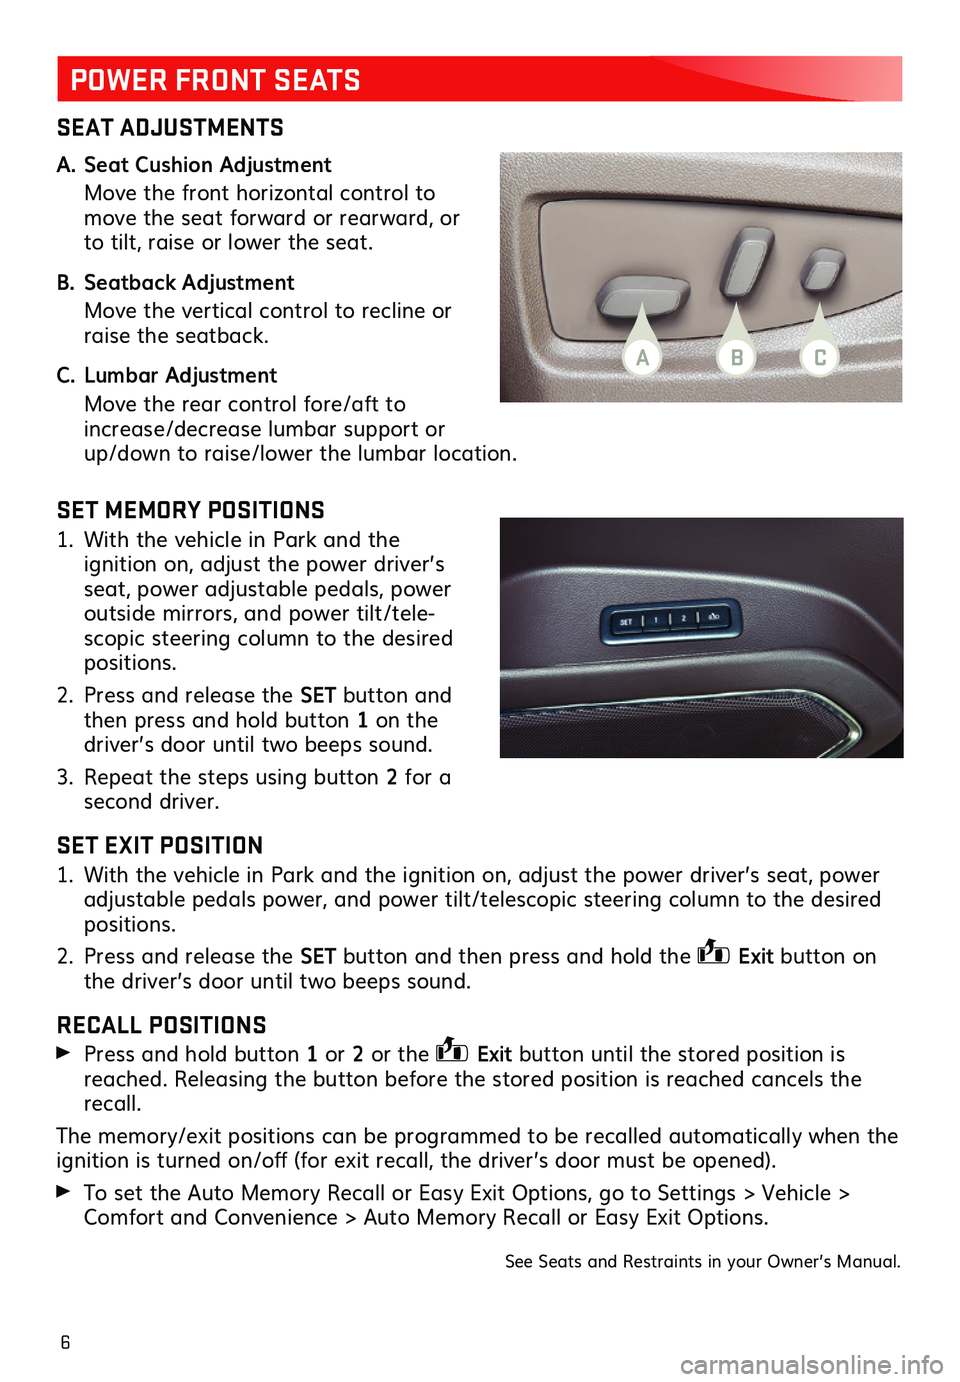 GMC YUKON 2019  Get To Know Guide 6
SEAT ADJUSTMENTS
A. Seat Cushion Adjustment
 Move the front horizontal control to move the seat forward or rearward, or to tilt, raise or lower the seat.
B. Seatback Adjustment
 Move the vertical co